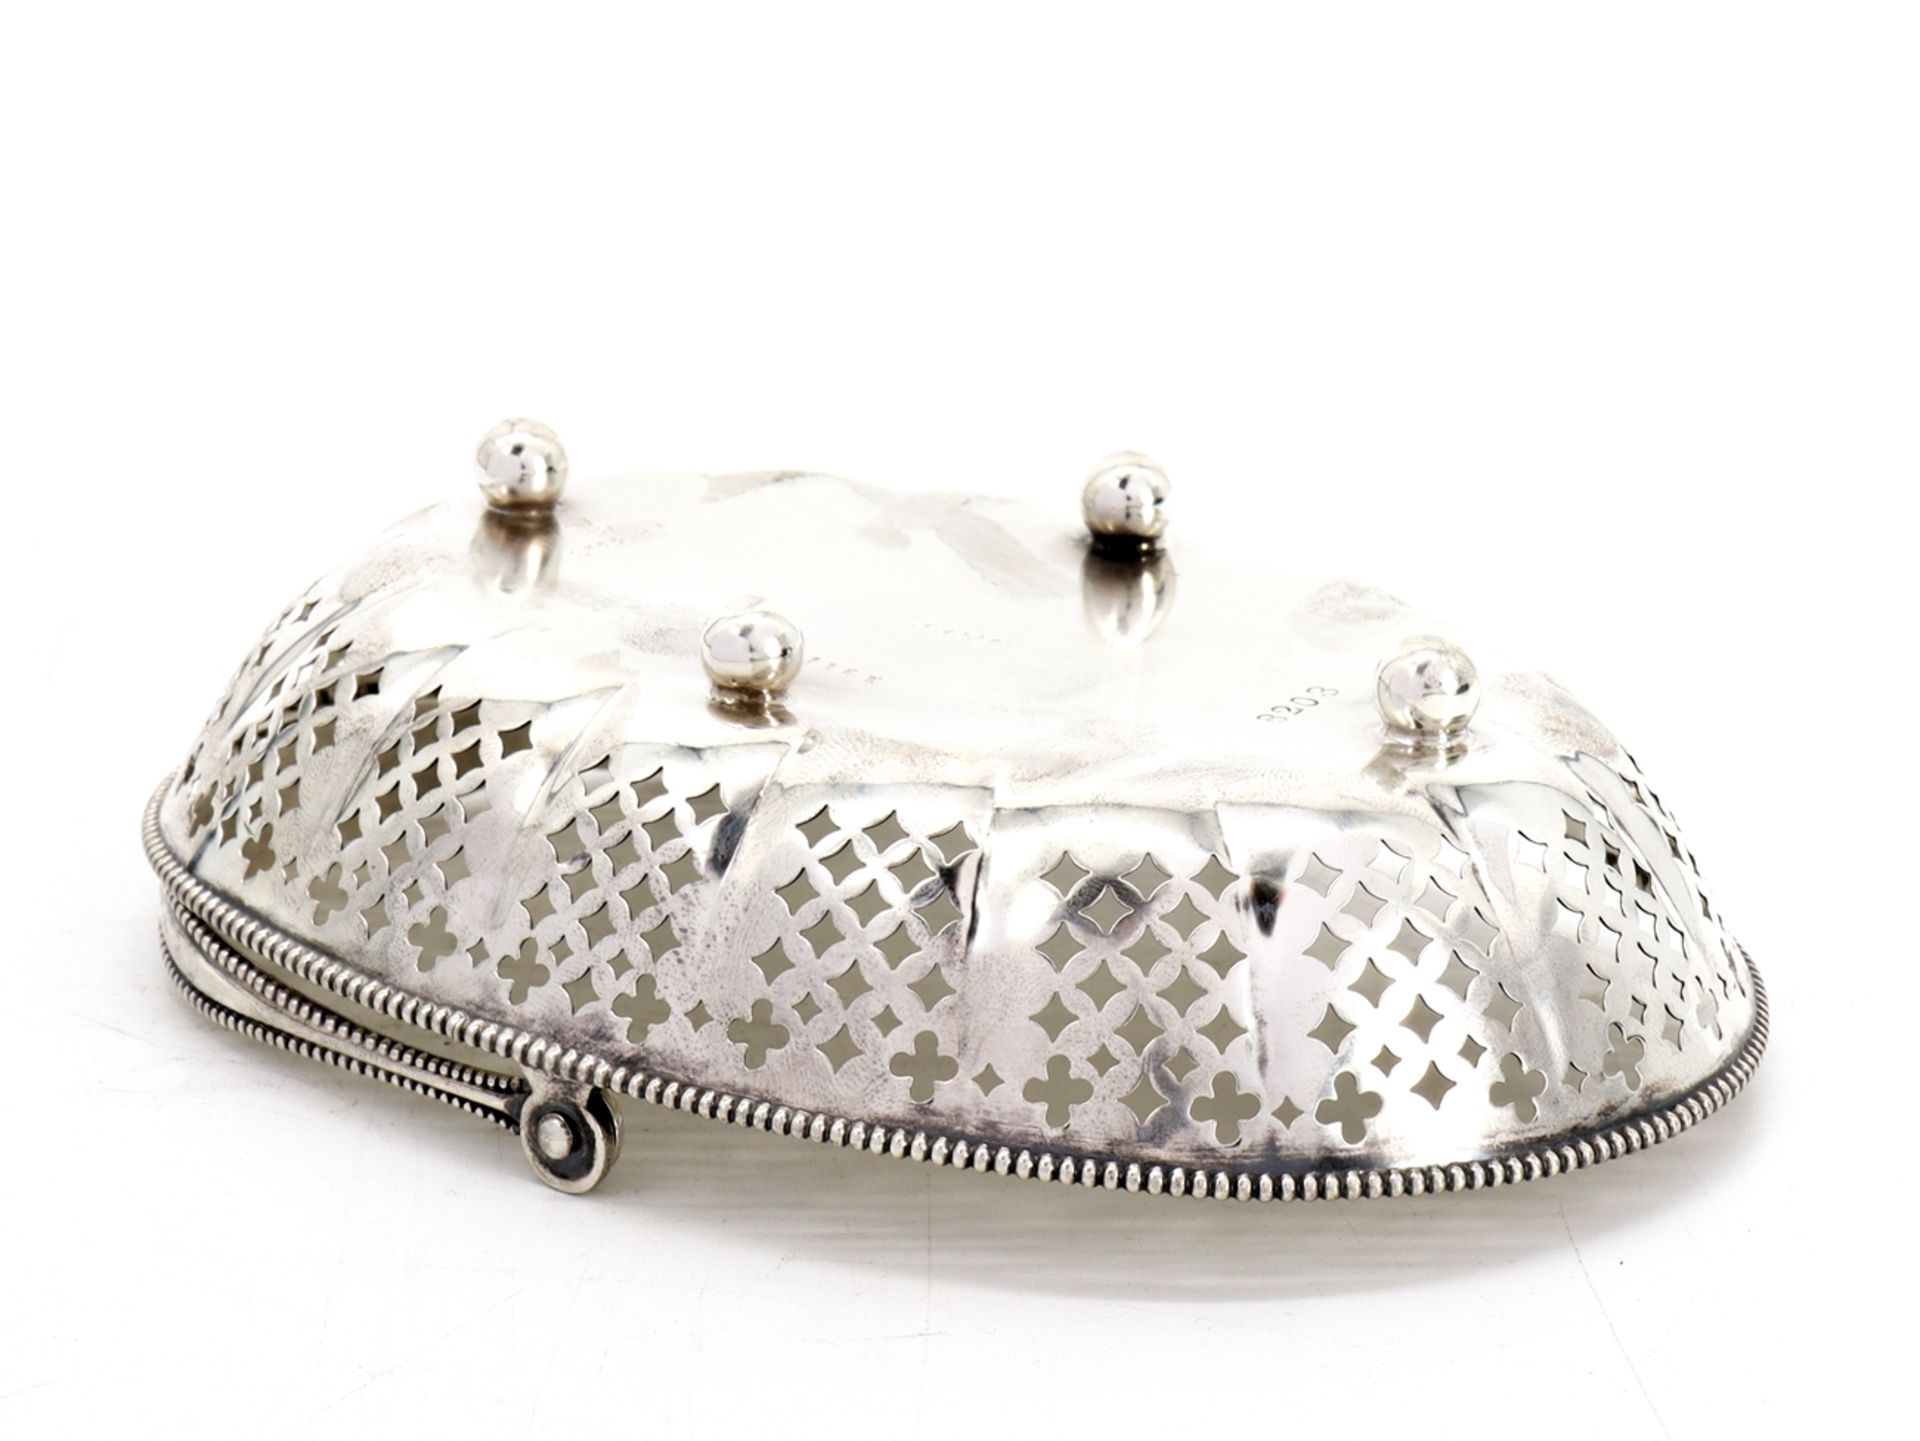 Handle basket, 925 sterling silver, dated 1899 - Image 3 of 7